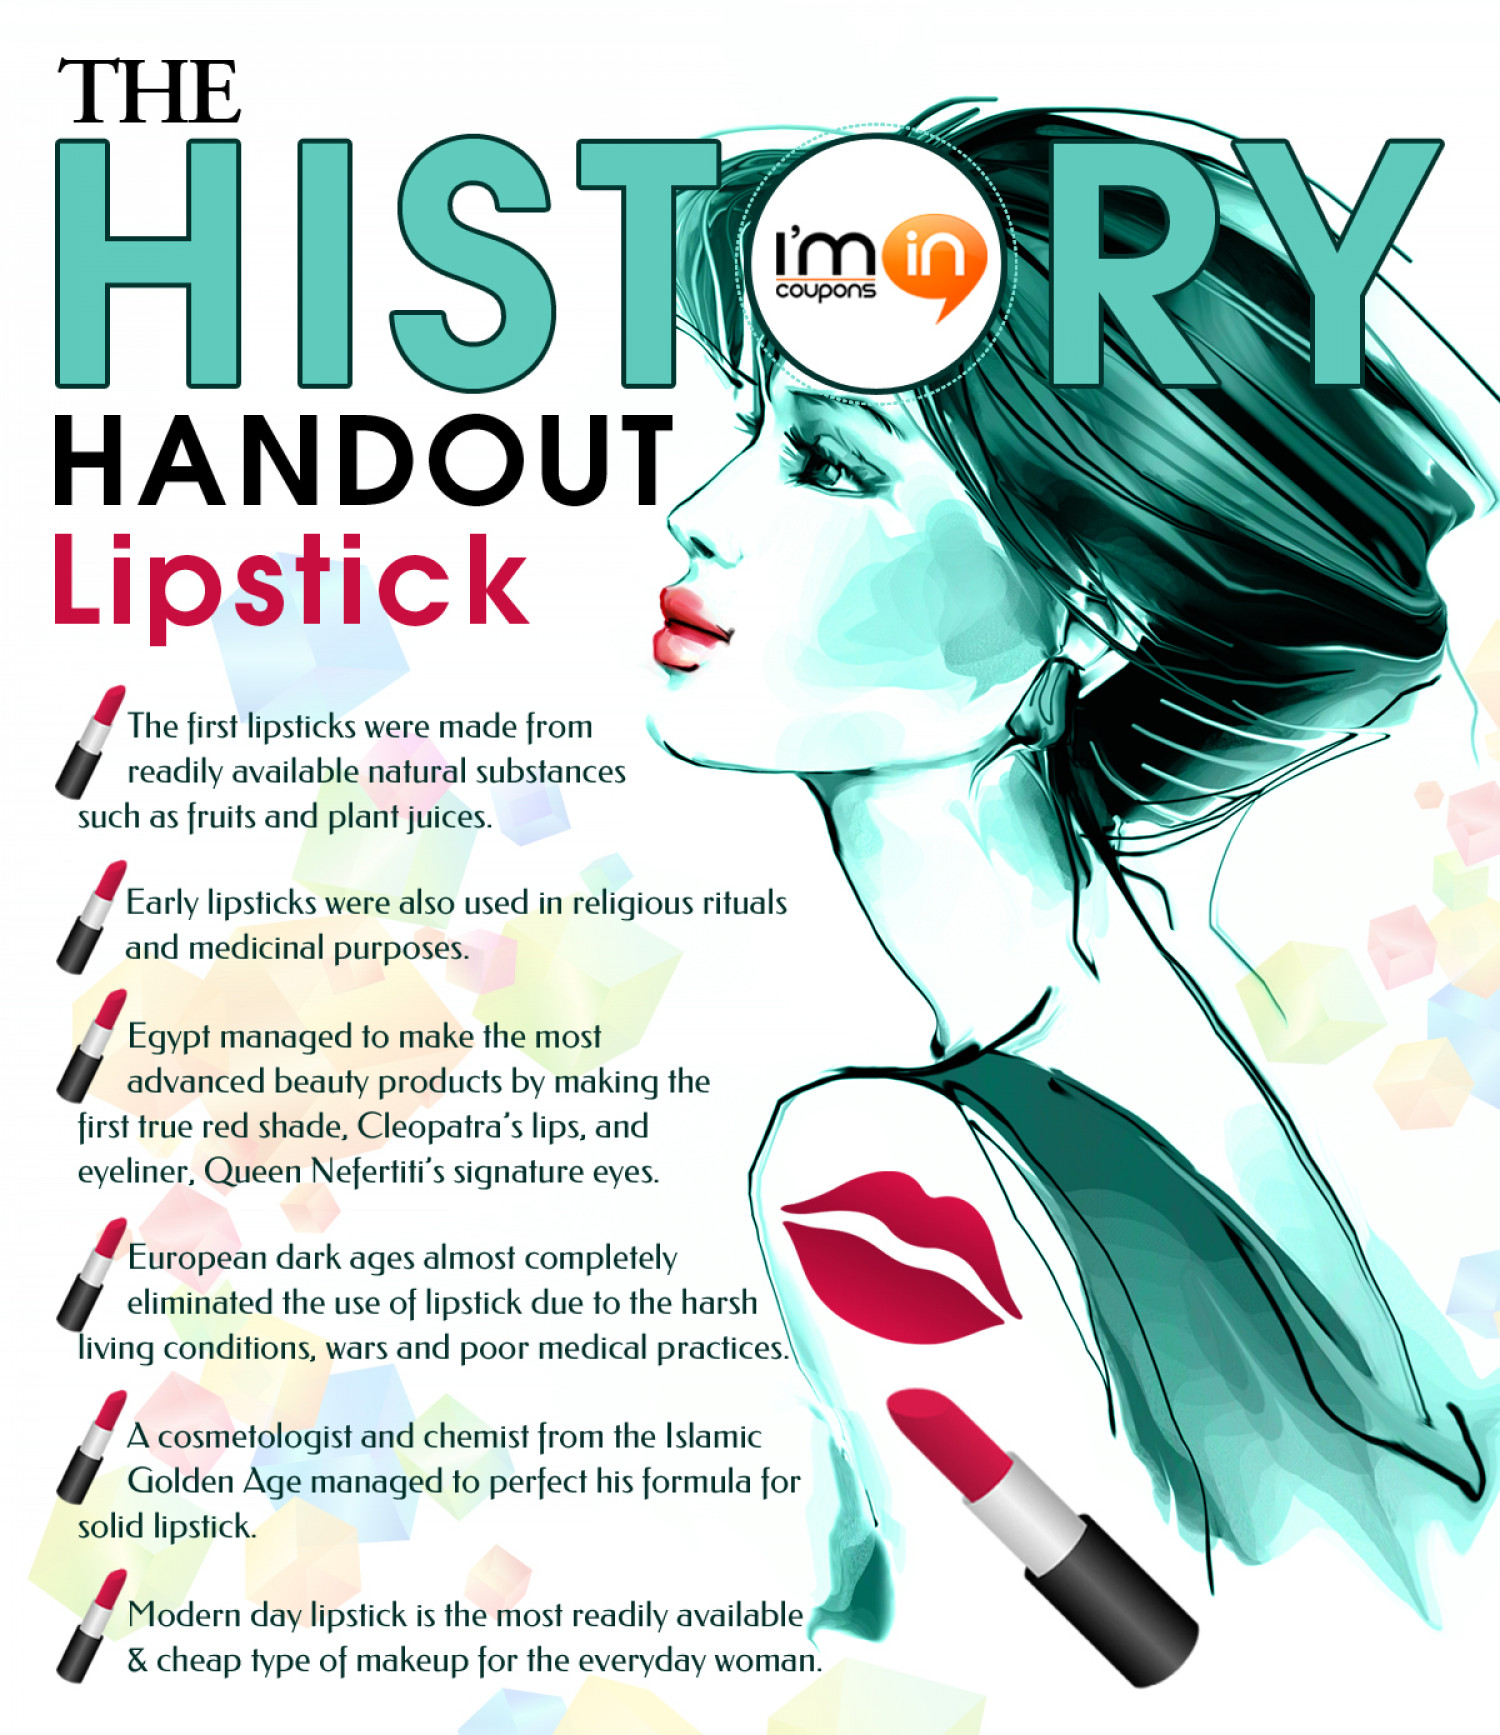 The History Handout - Lipstick Infographic